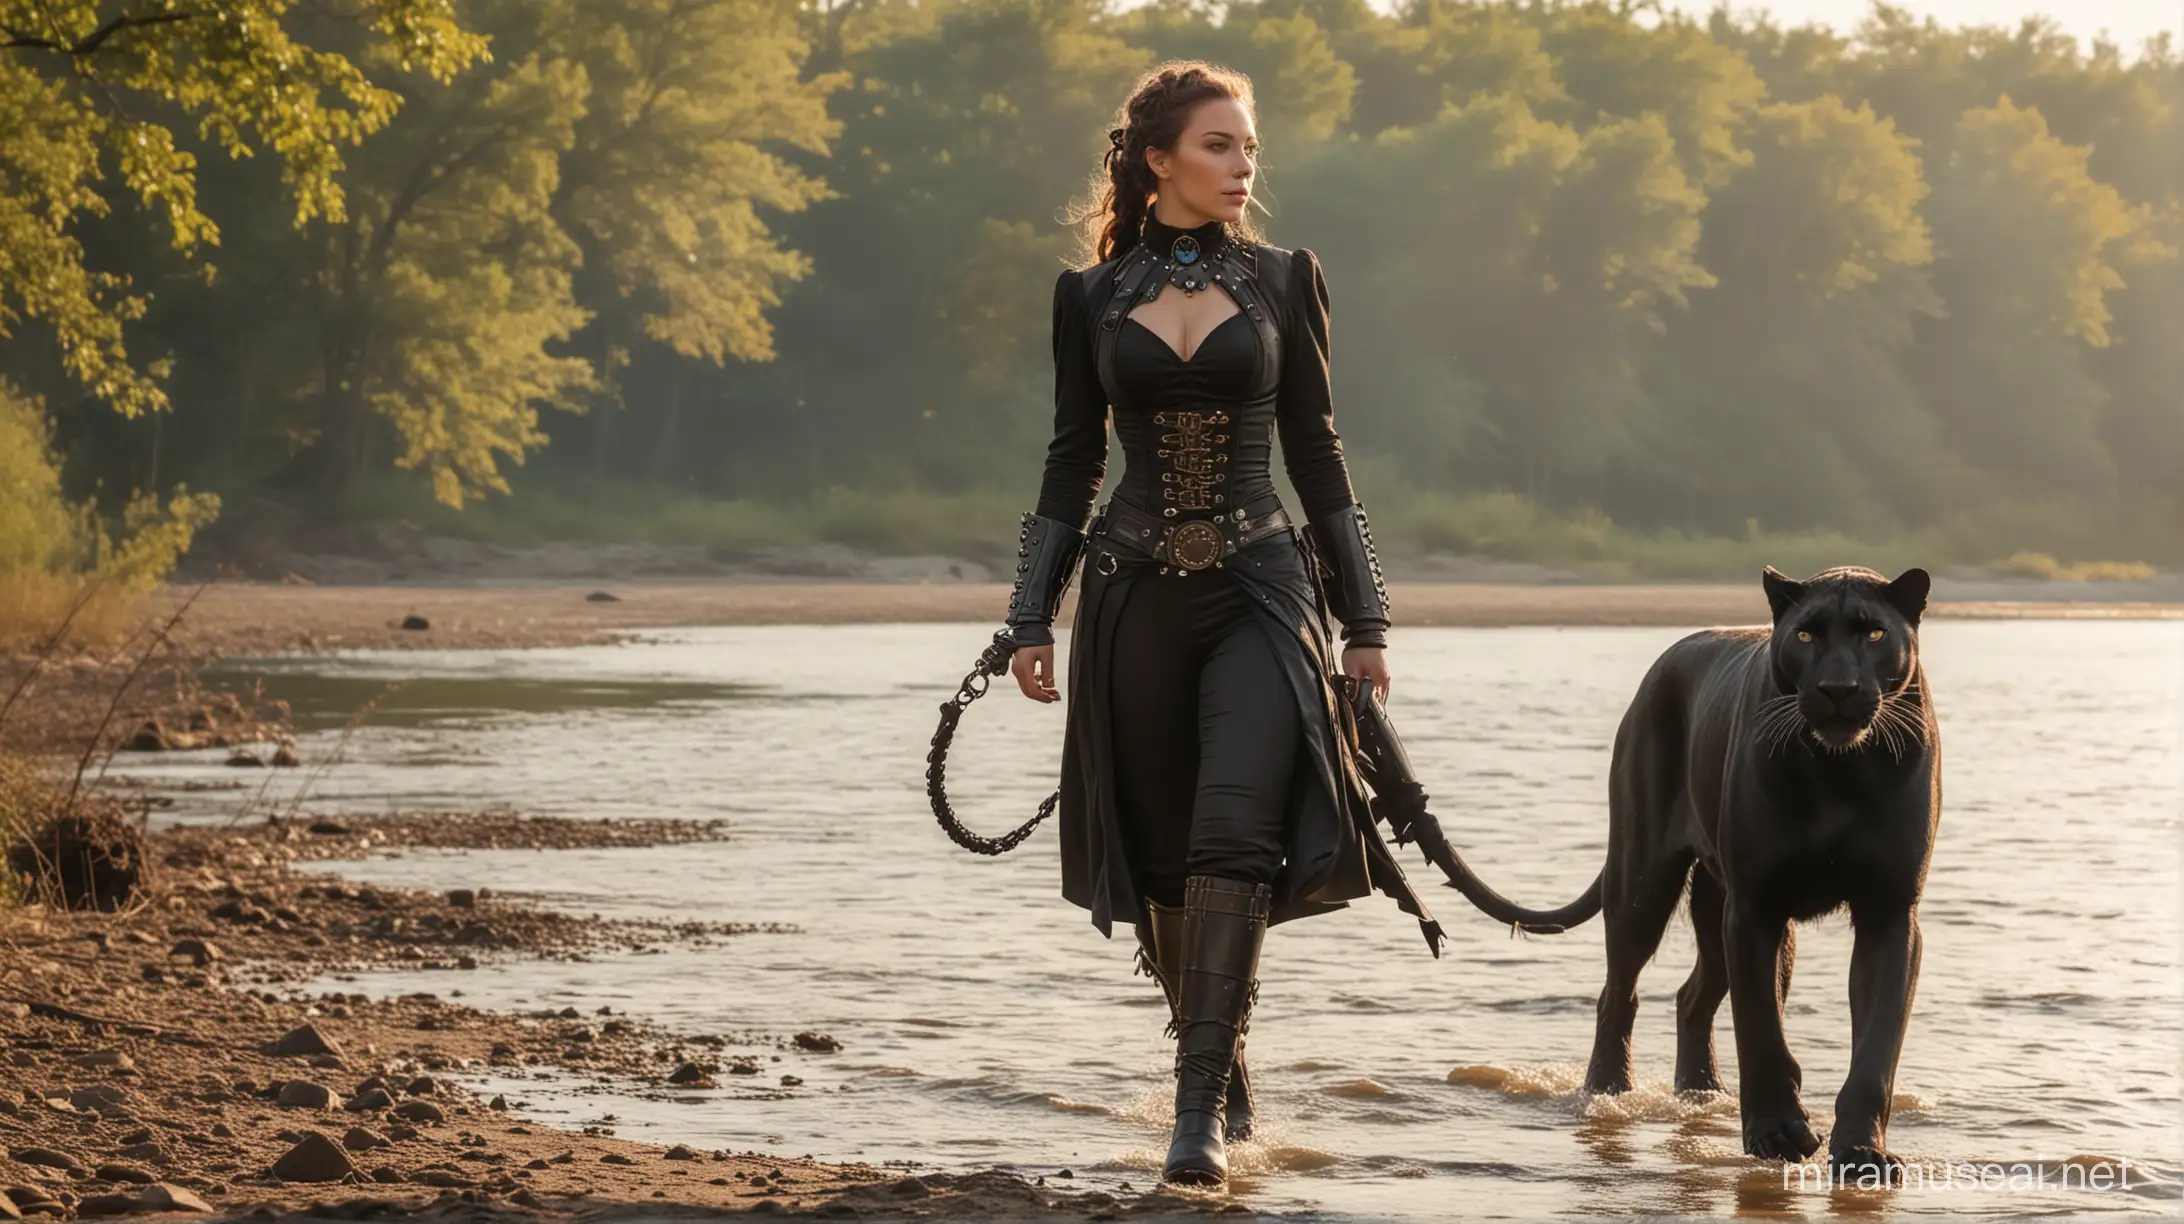 Steampunk Woman Walking Along River Shore with Black Panther